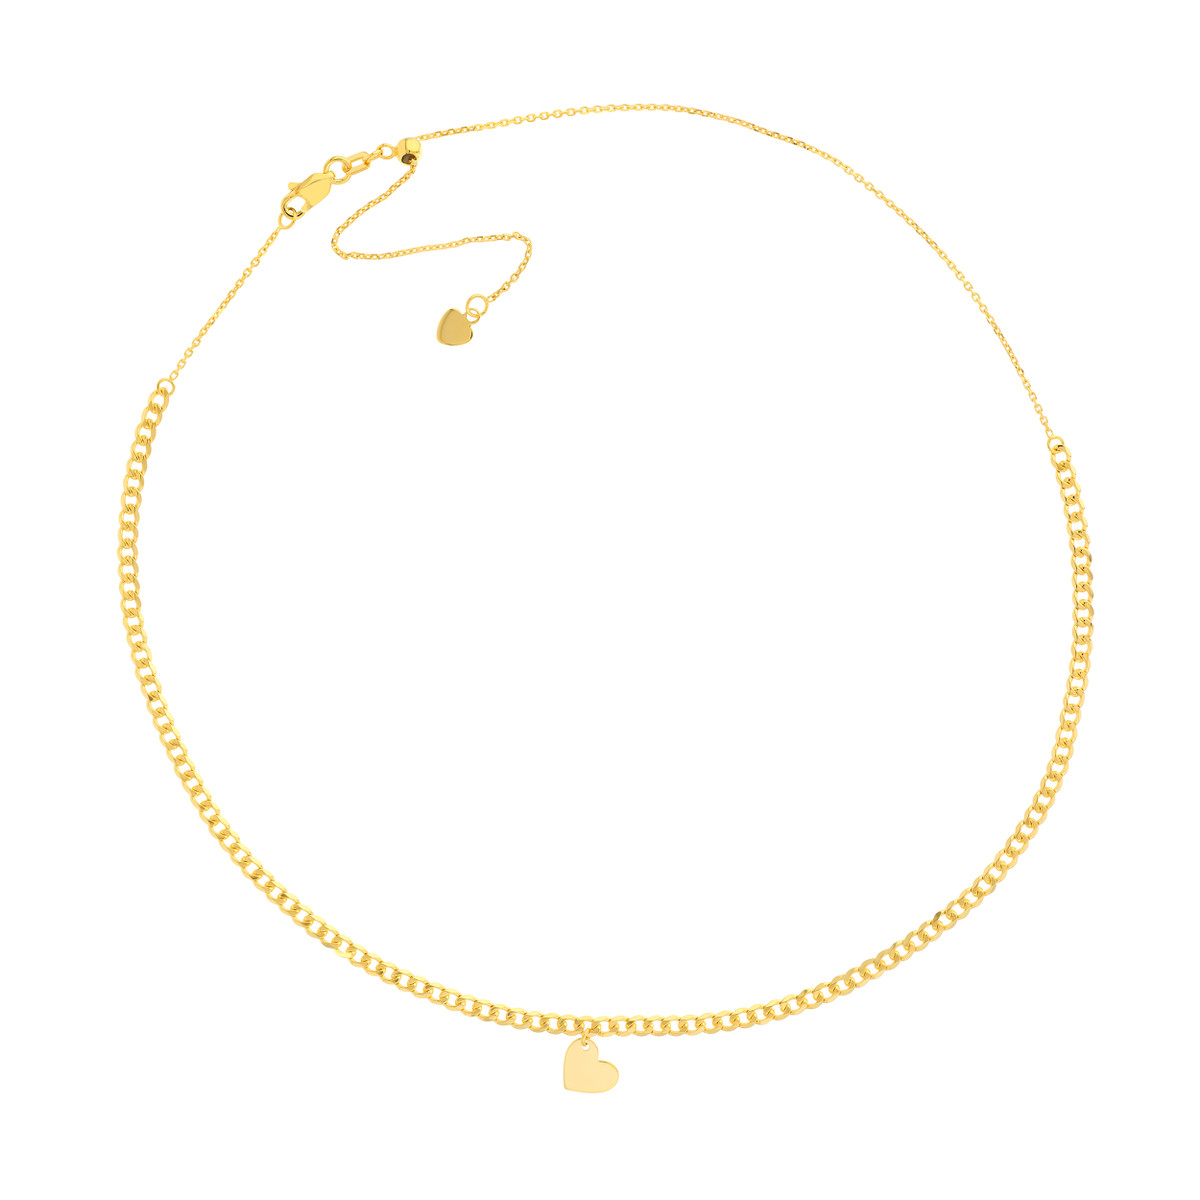 Hyde Park 14K Yellow gold 17" Adjustable Curb Link Chain Necklace With Slanted Heart-23764